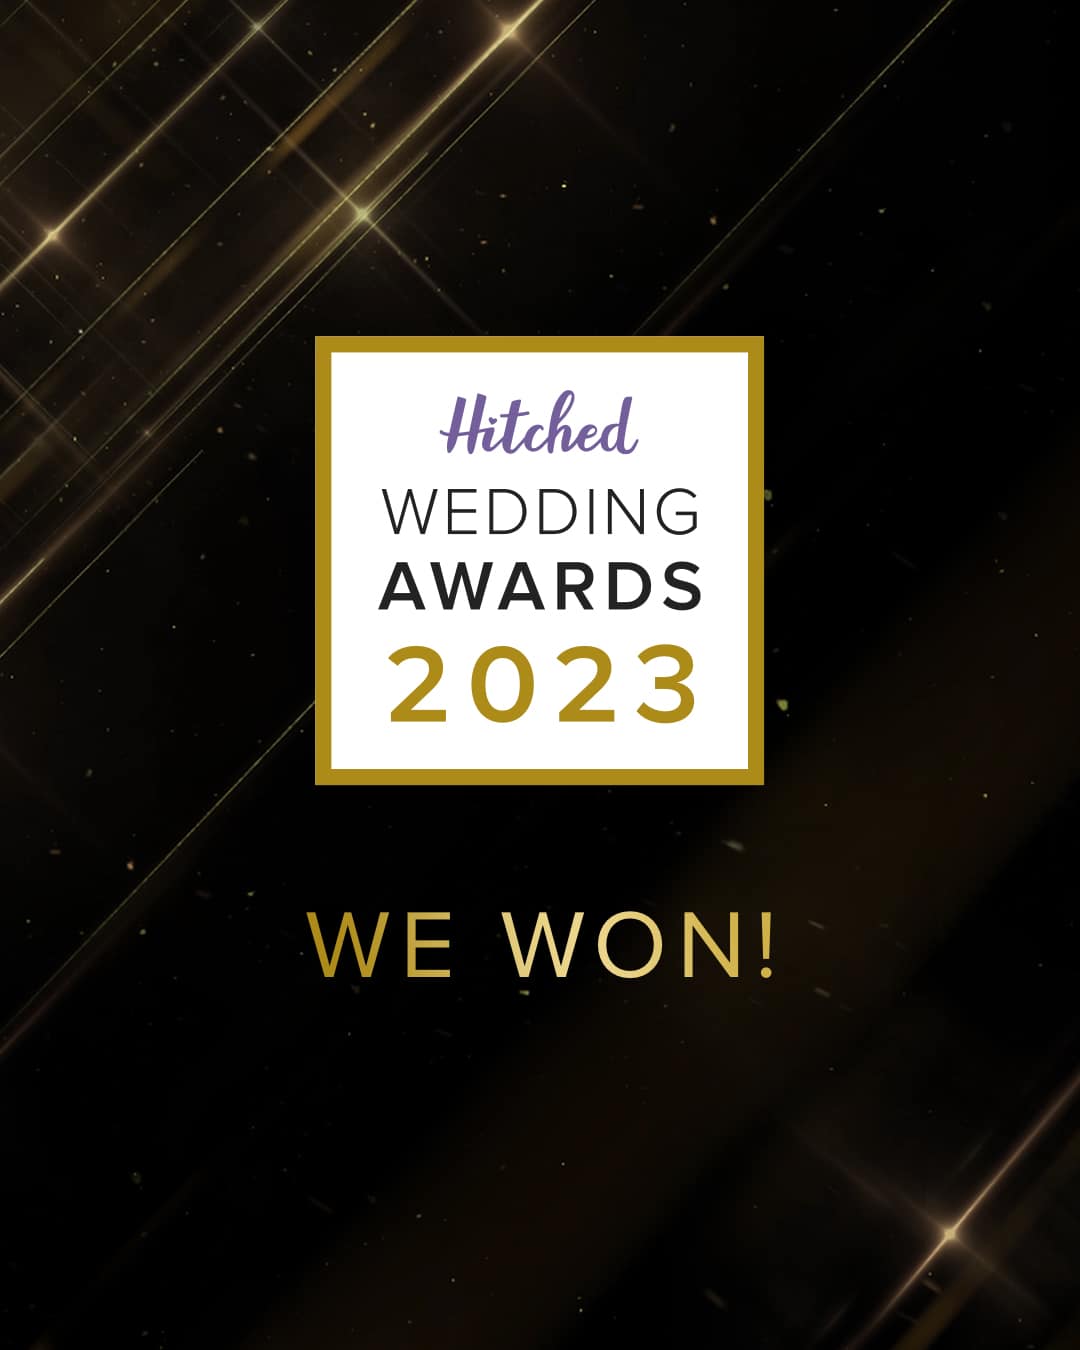 hitched winner first dance choreography wedding award